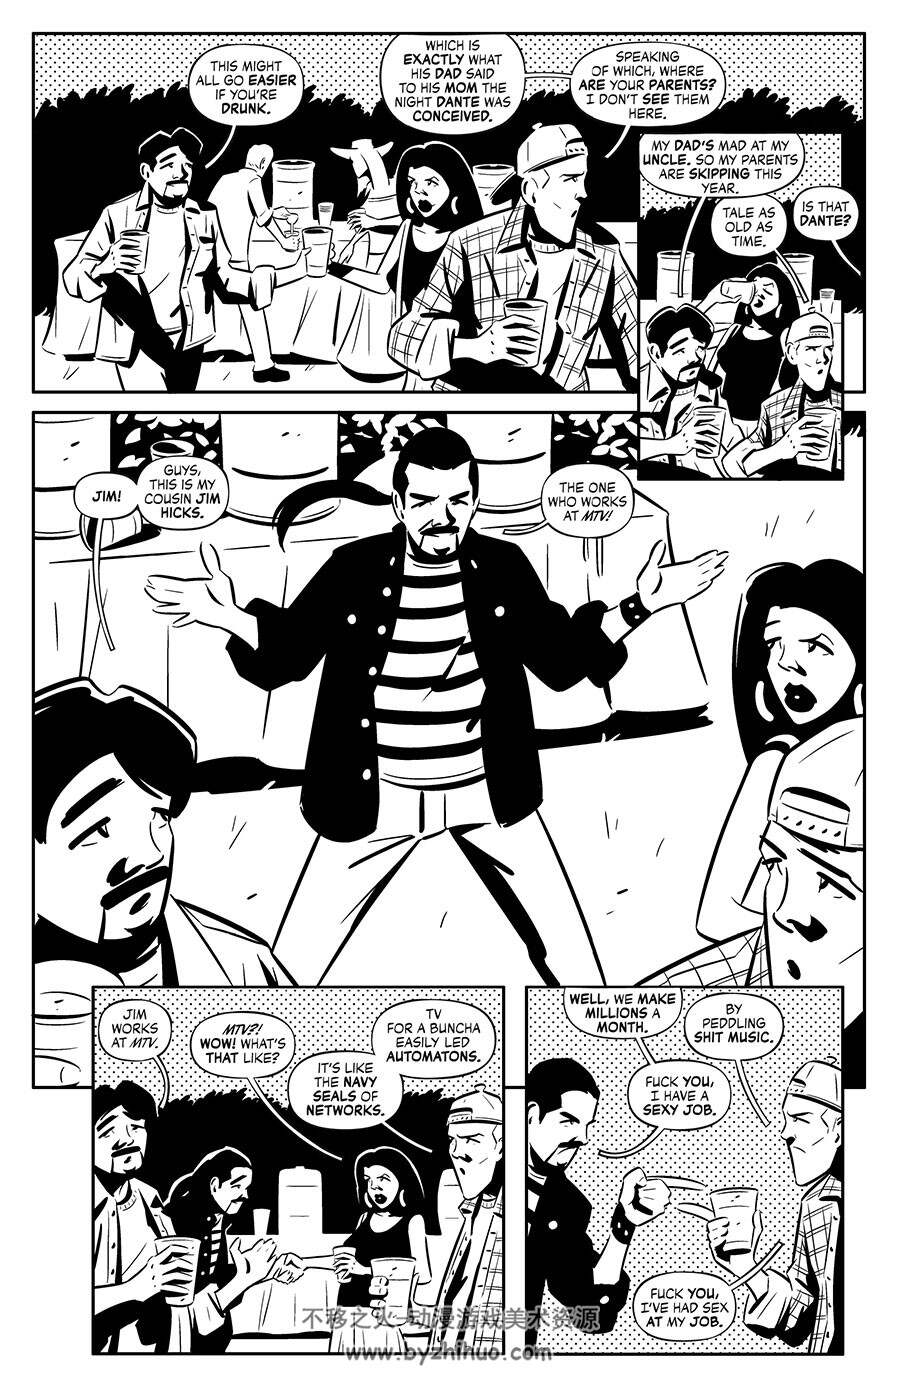 Quick Stops 第4册 Kevin Smith 漫画下载